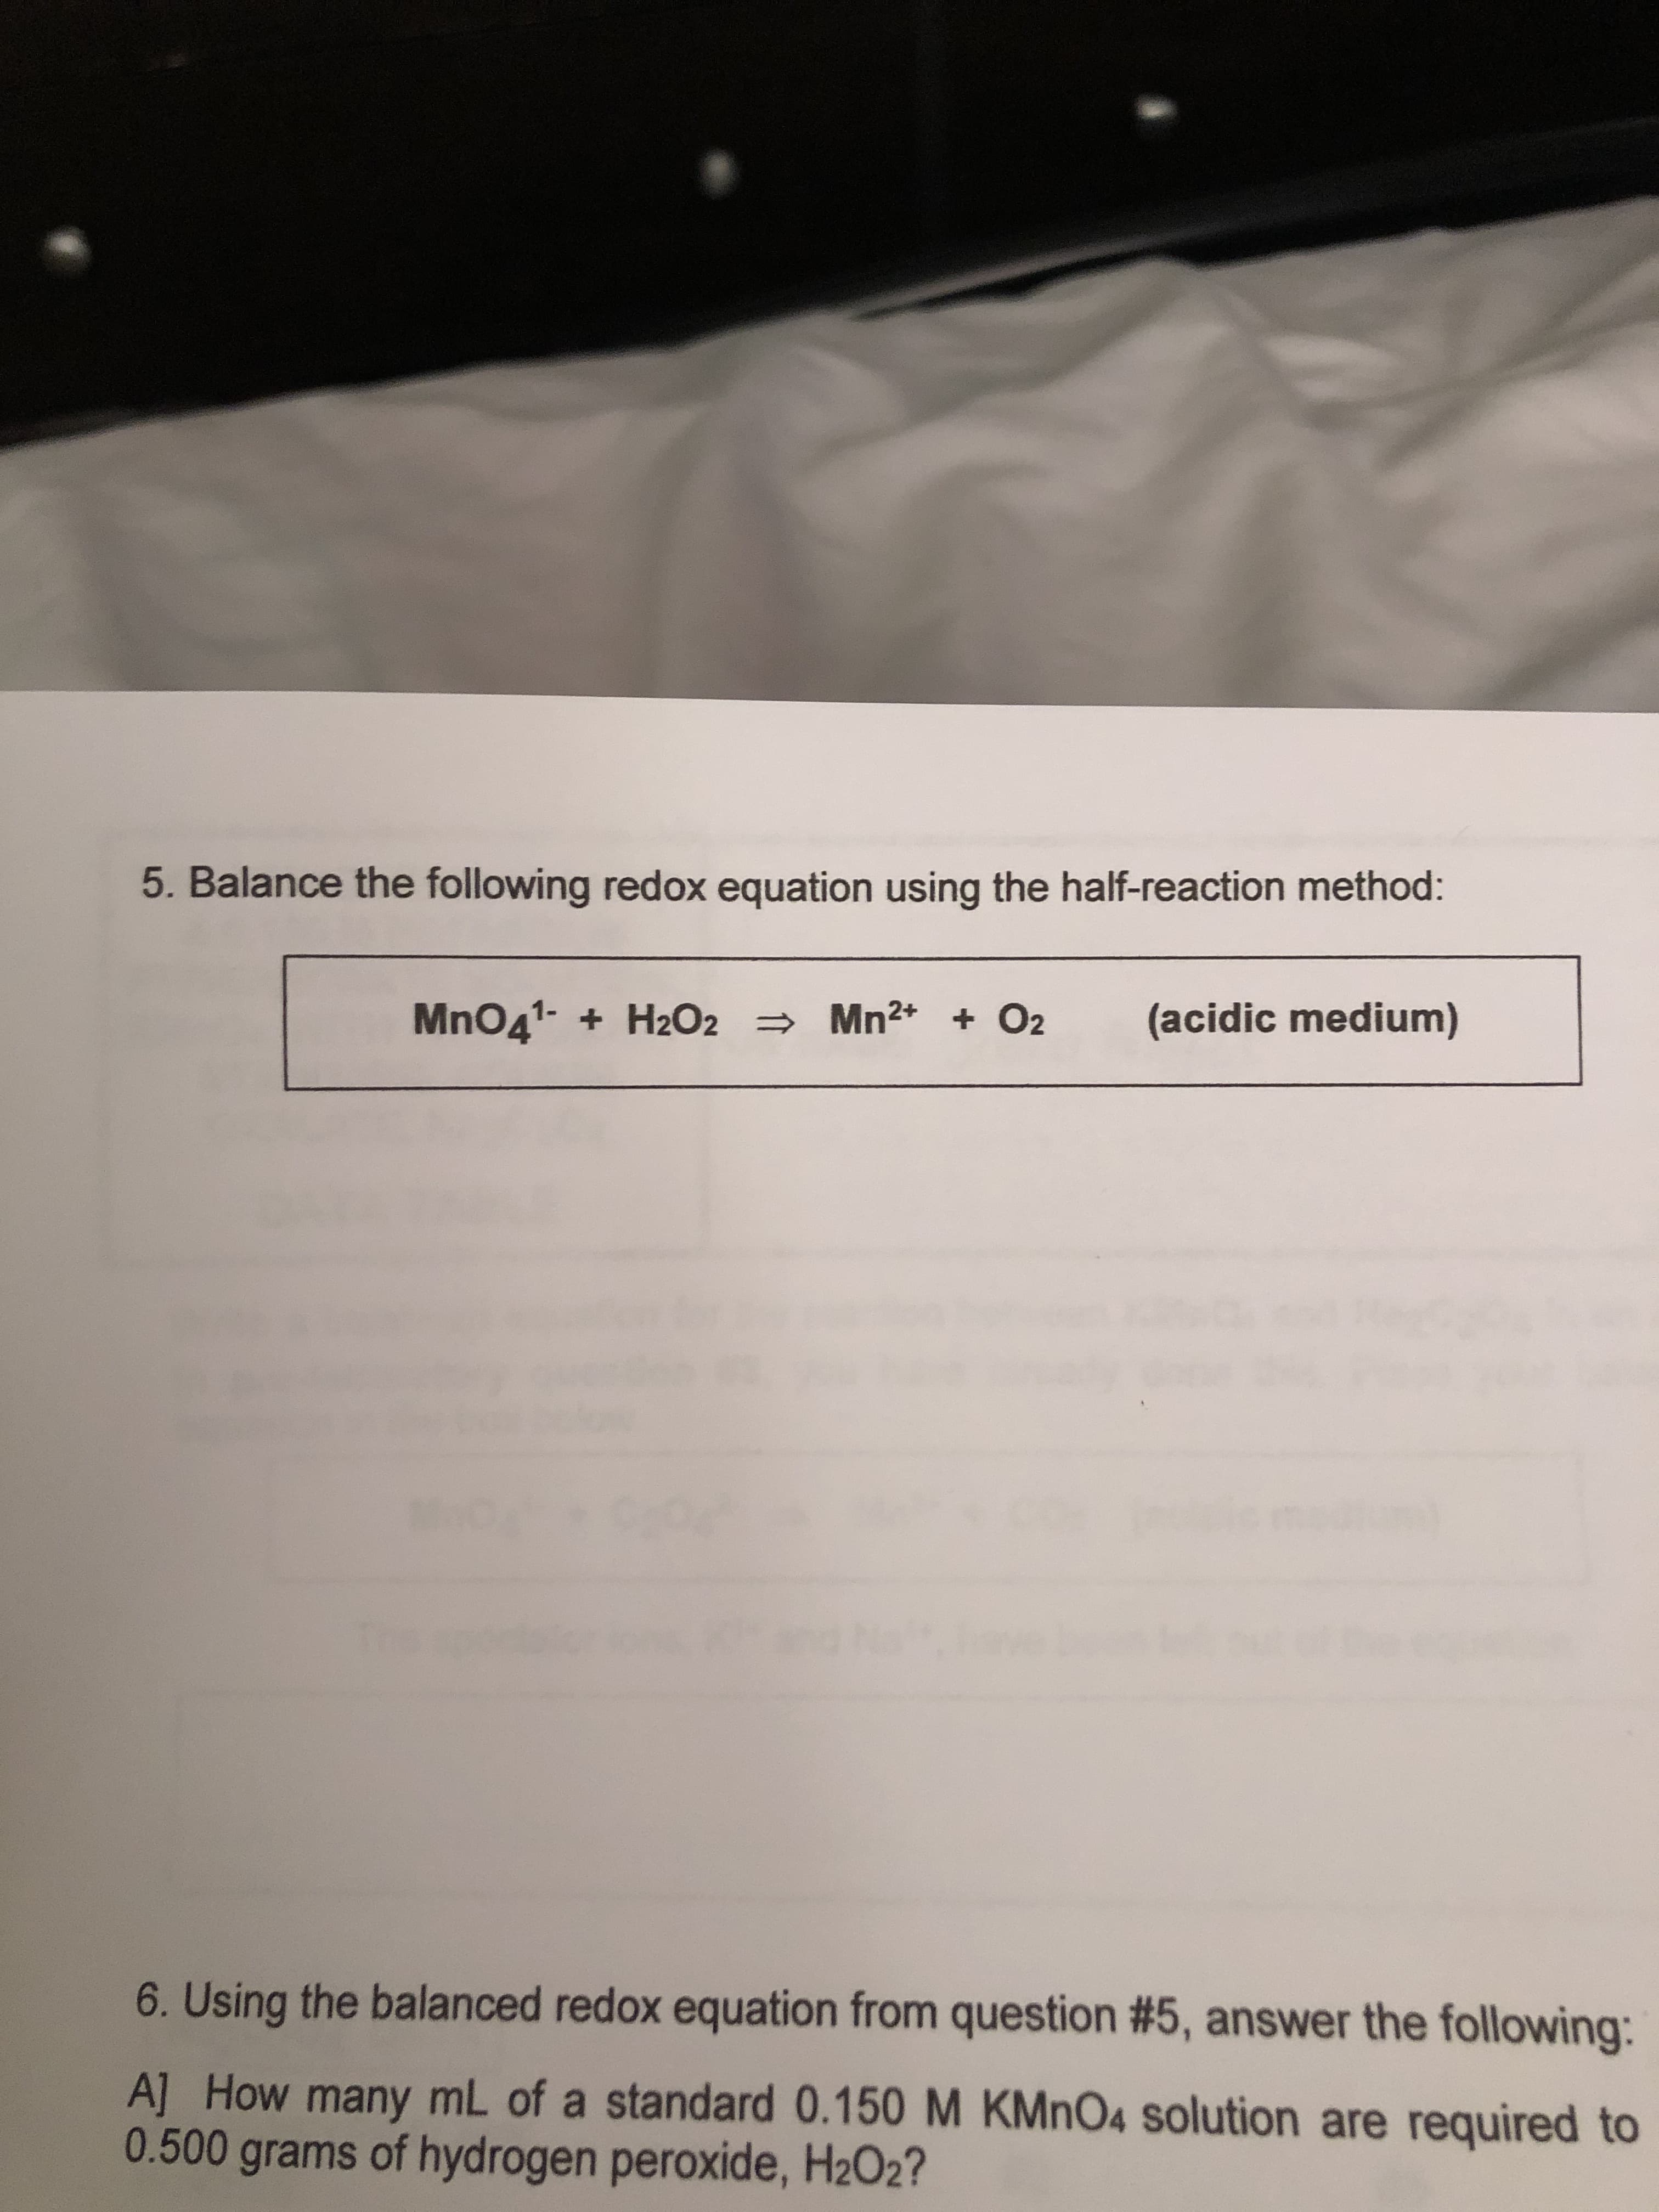 5. Balance the following redox equation using the half-reaction method:
MnO41-H2O2 Mn2 O2
(acidic medium)
6. Using the balanced redox equation from question #5, answer the following:
A] How many mL of a standard 0.150 M KMnO4 solution are required to
0.500 grams of hydrogen peroxide, H2O2?
